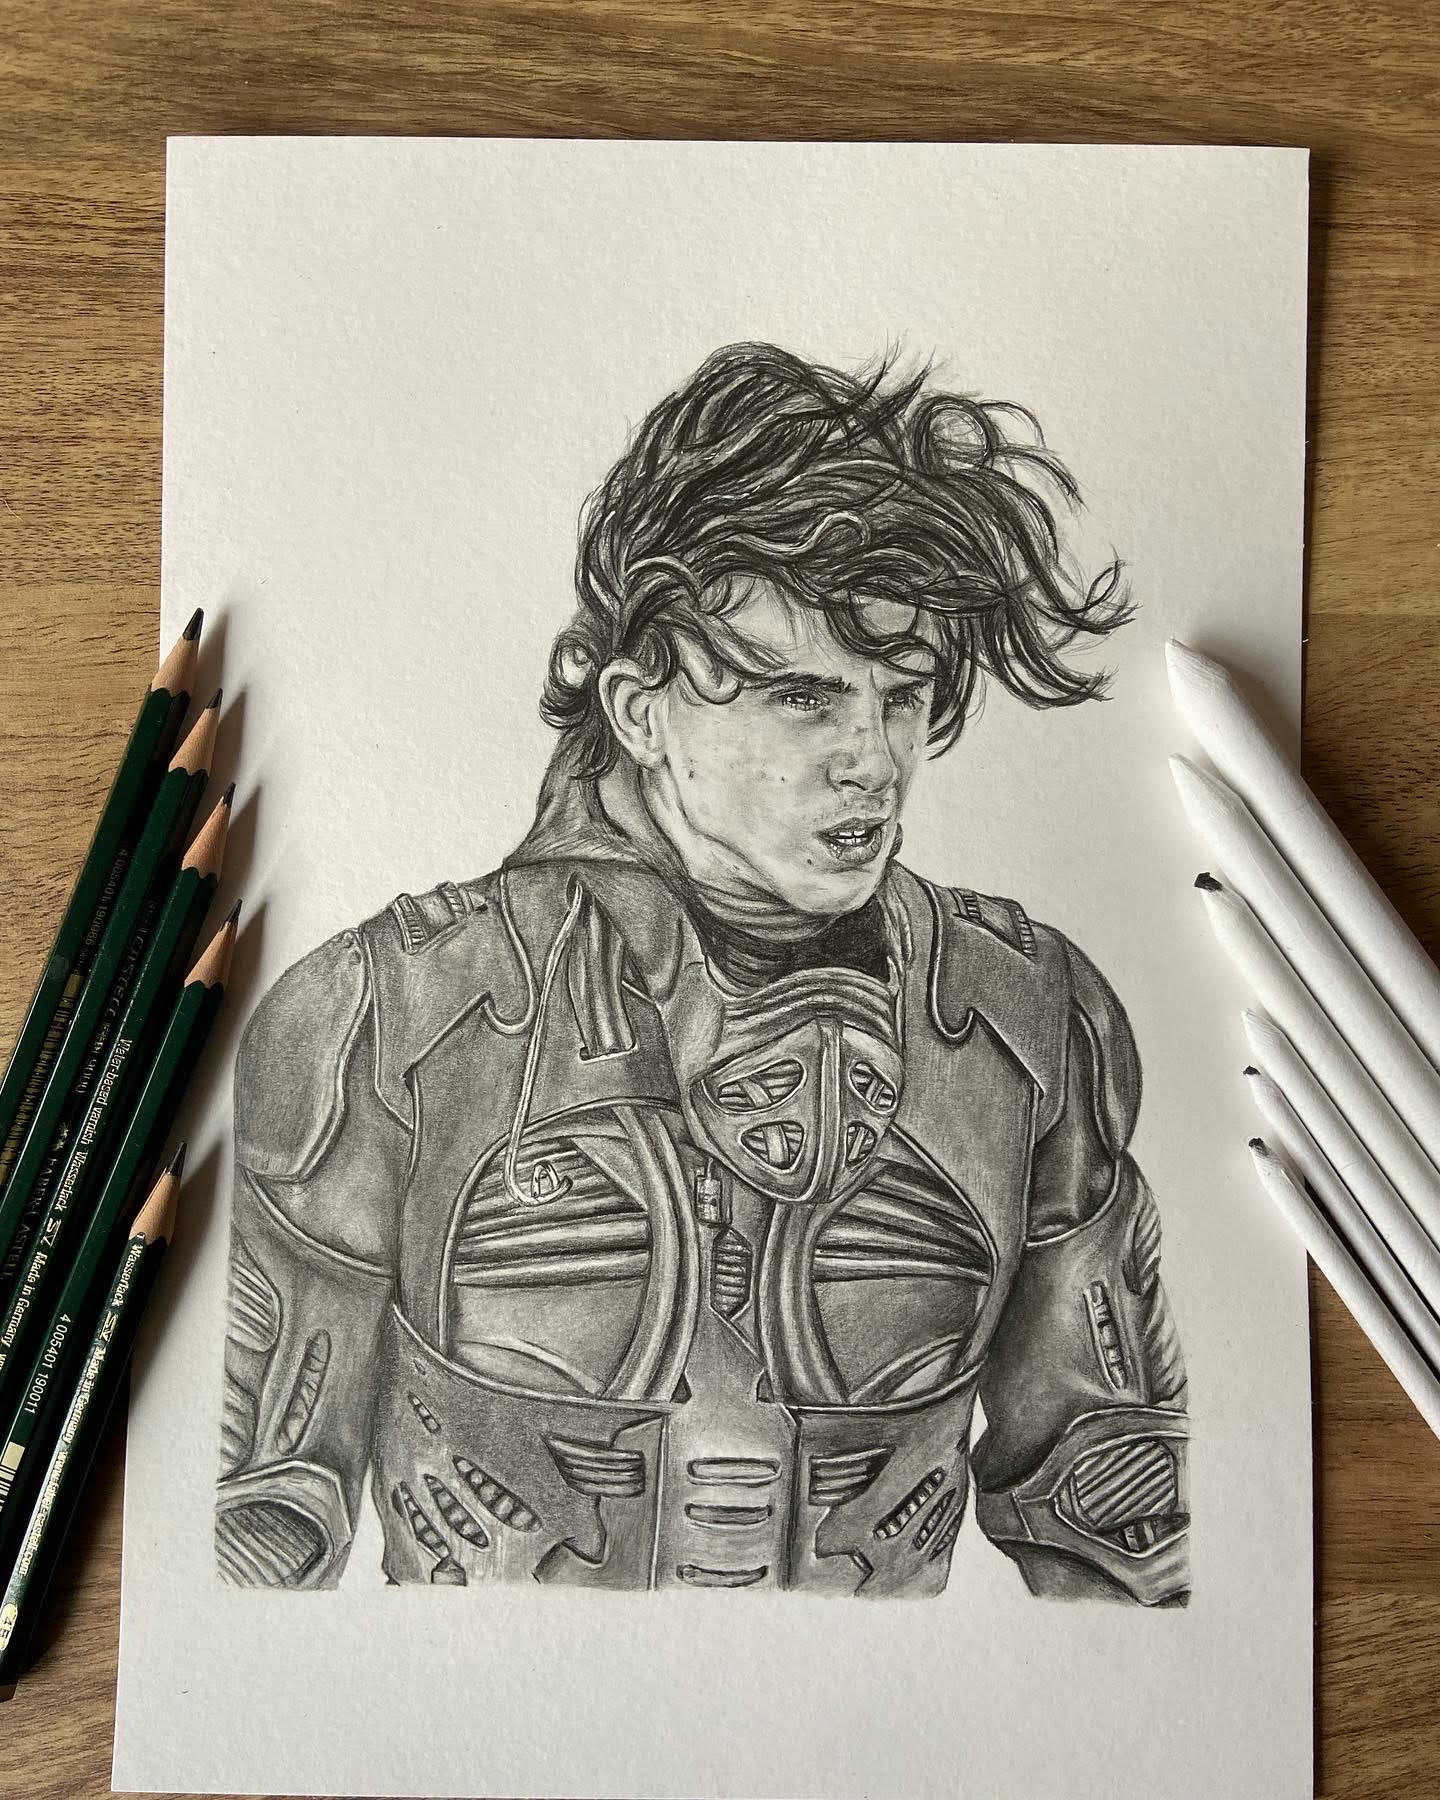 Pencil drawing of Timothee Chalemet depicting Paul Atreides in the 2021 version of 'Dune